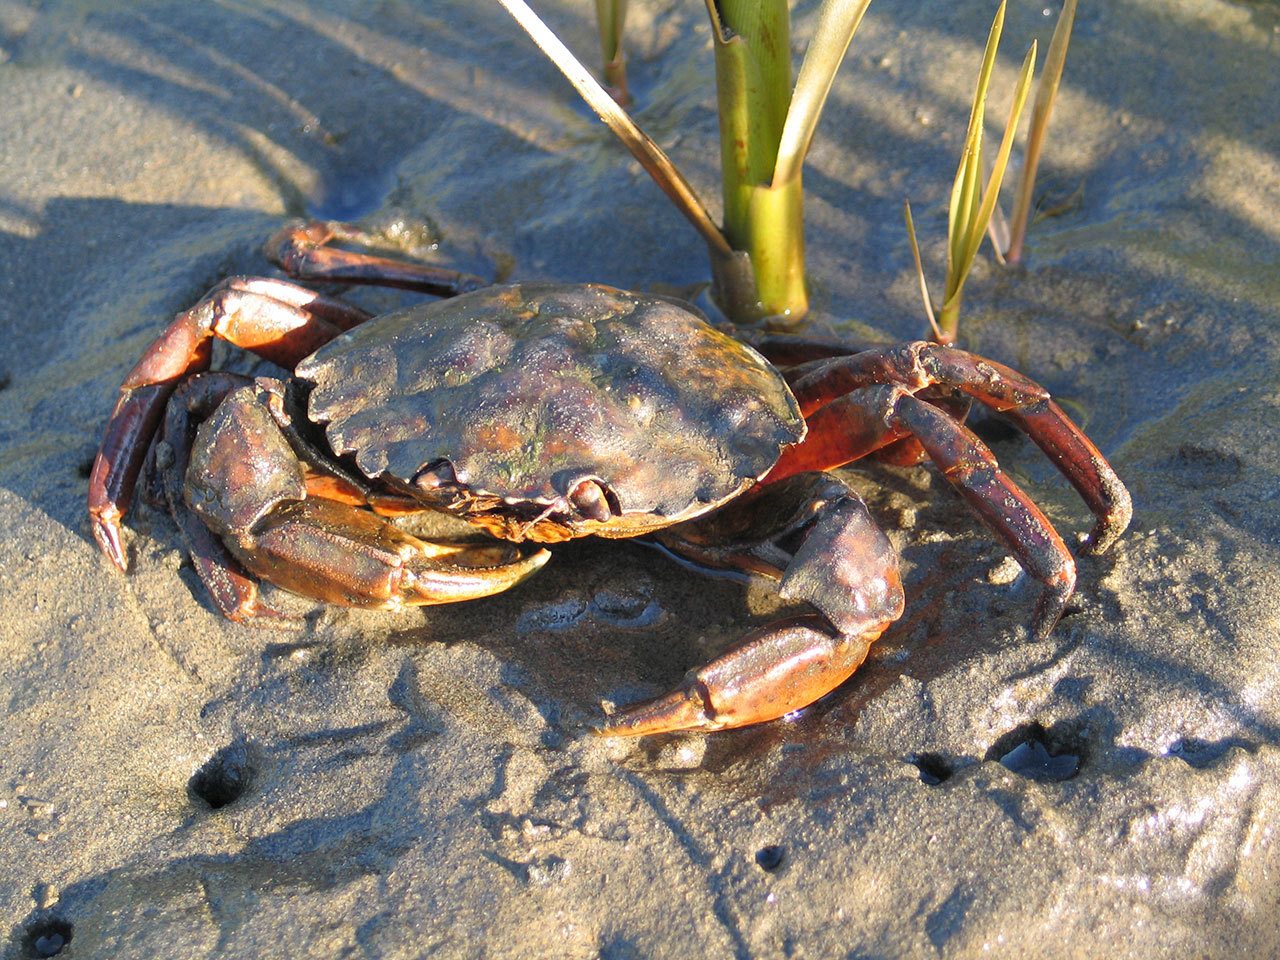 Scientists are asking the public to watch out for European green crabs in the Strait of Juan de Fuca and in Puget Sound. The Washington Sea Grant crab team has been monitoring for the invasive crab and hasn’t found any. (Washington Sea Grant)